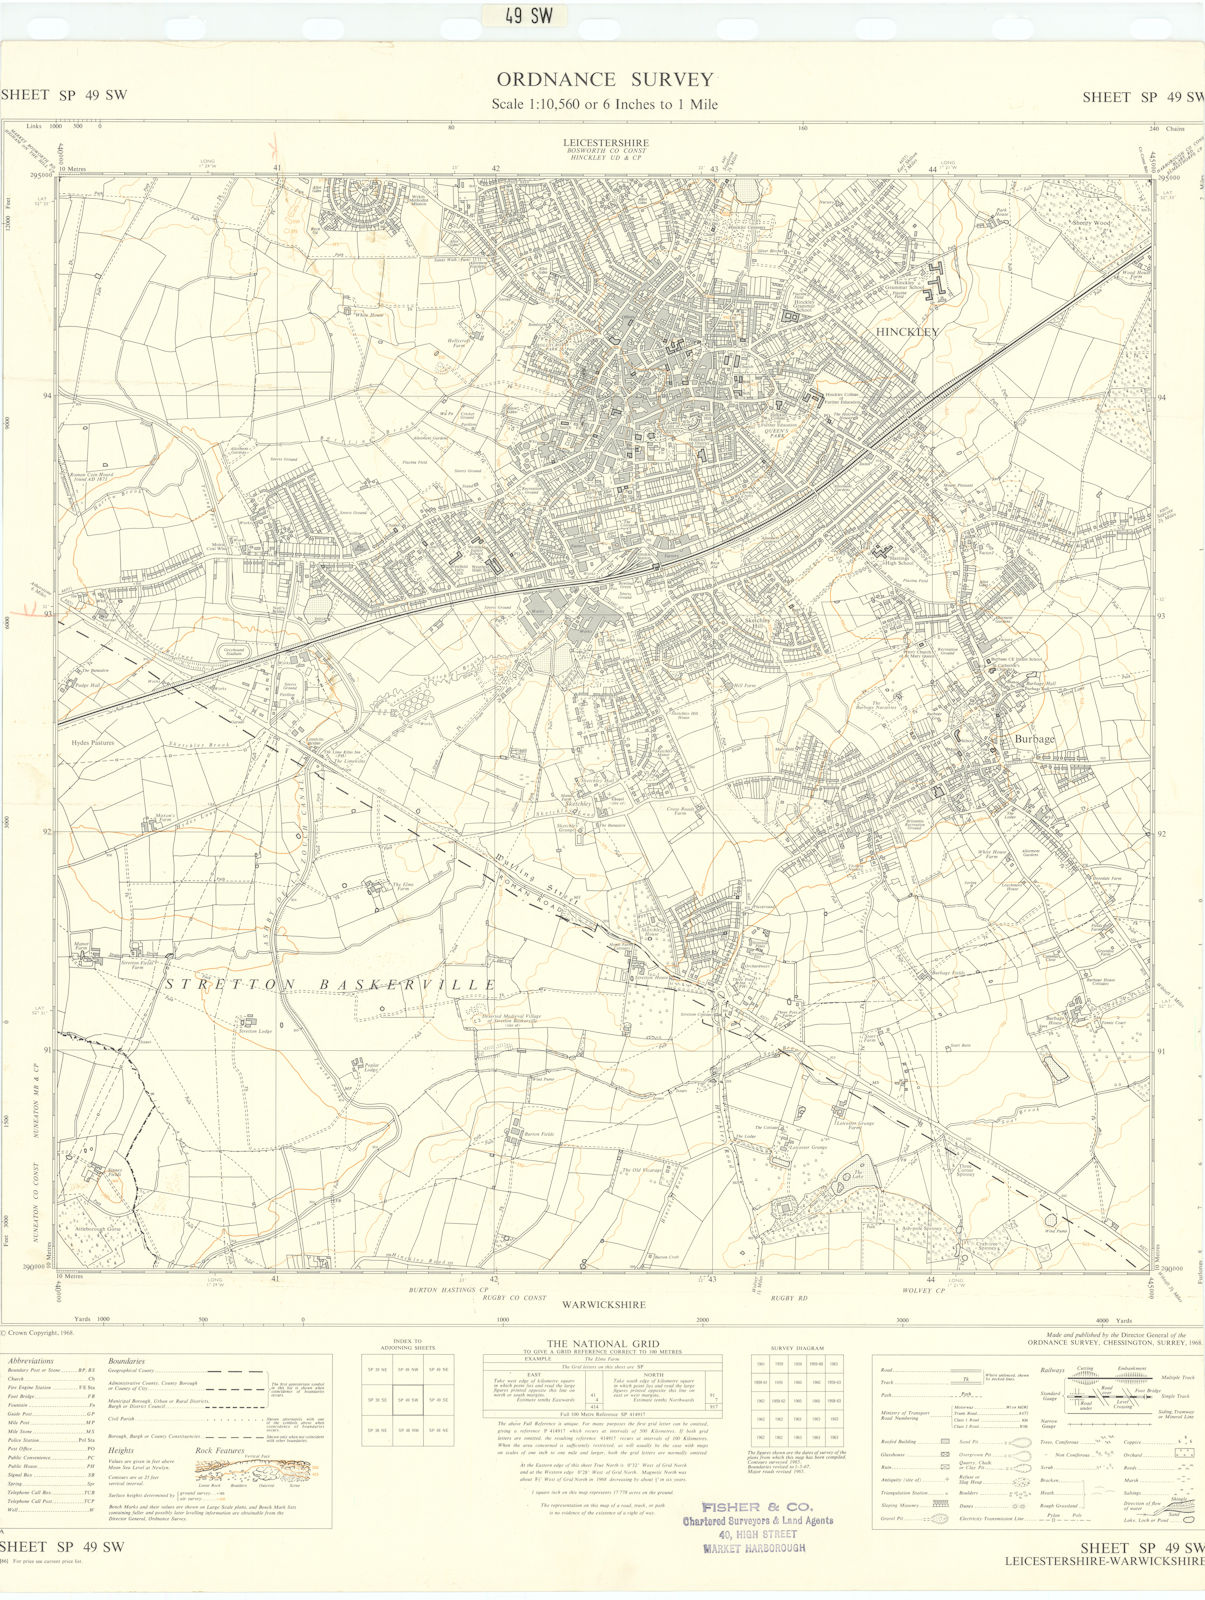 Ordnance Survey Sheet SP49SW Leicestershire Hinckley Burbage 1968 old map